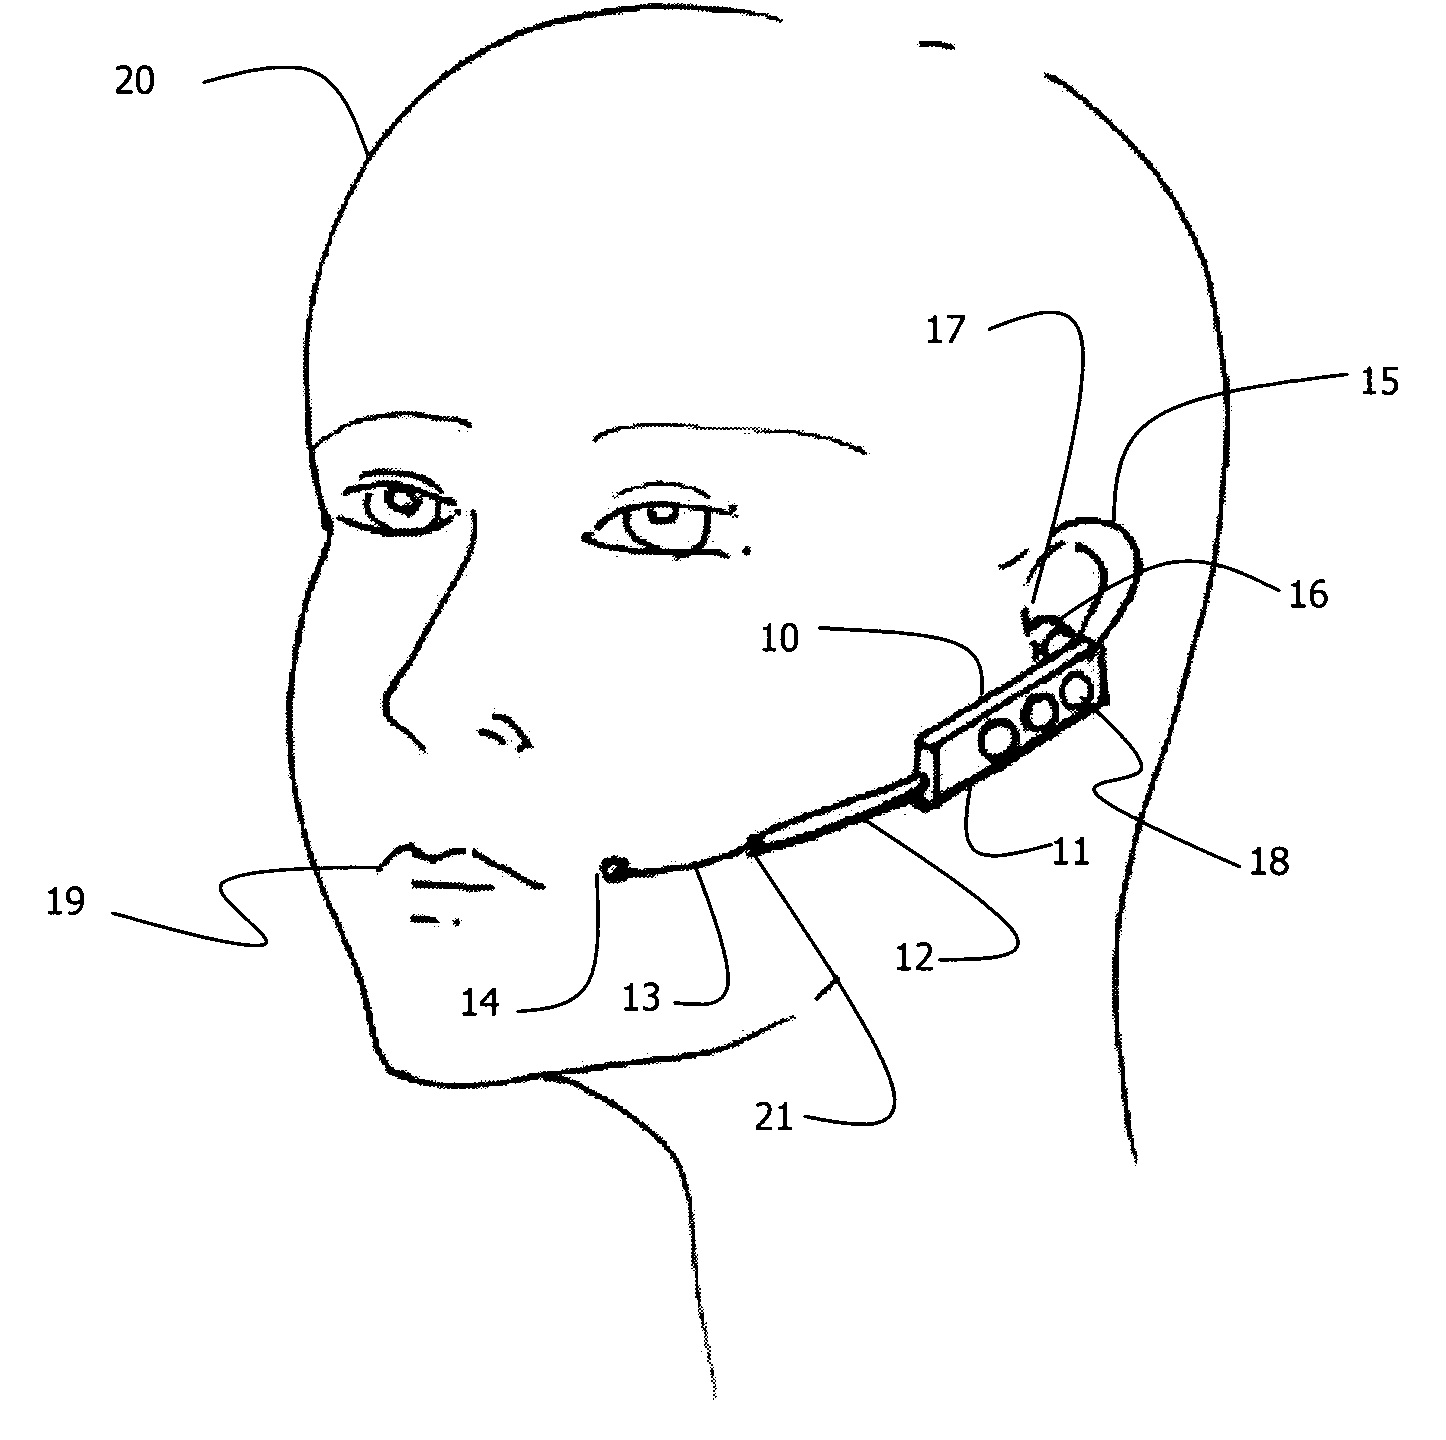 Wireless headset with microphone boom with new bending properties